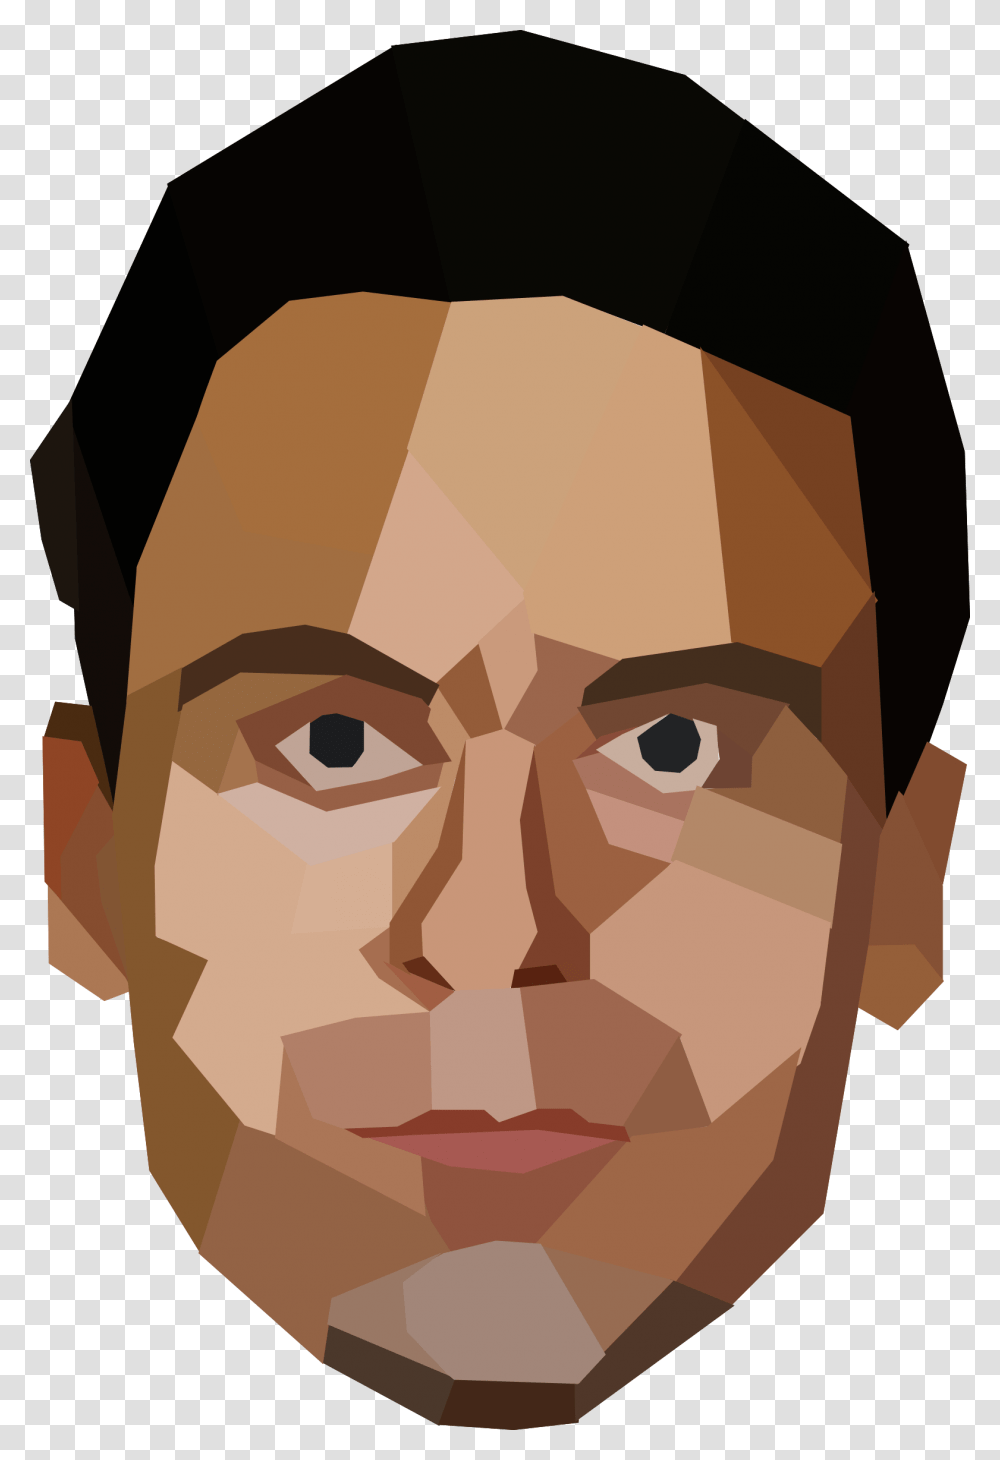 Ted Bundy One Of The Most Prolific Serial Killers Illustration, Face, Head, Smile, Rug Transparent Png